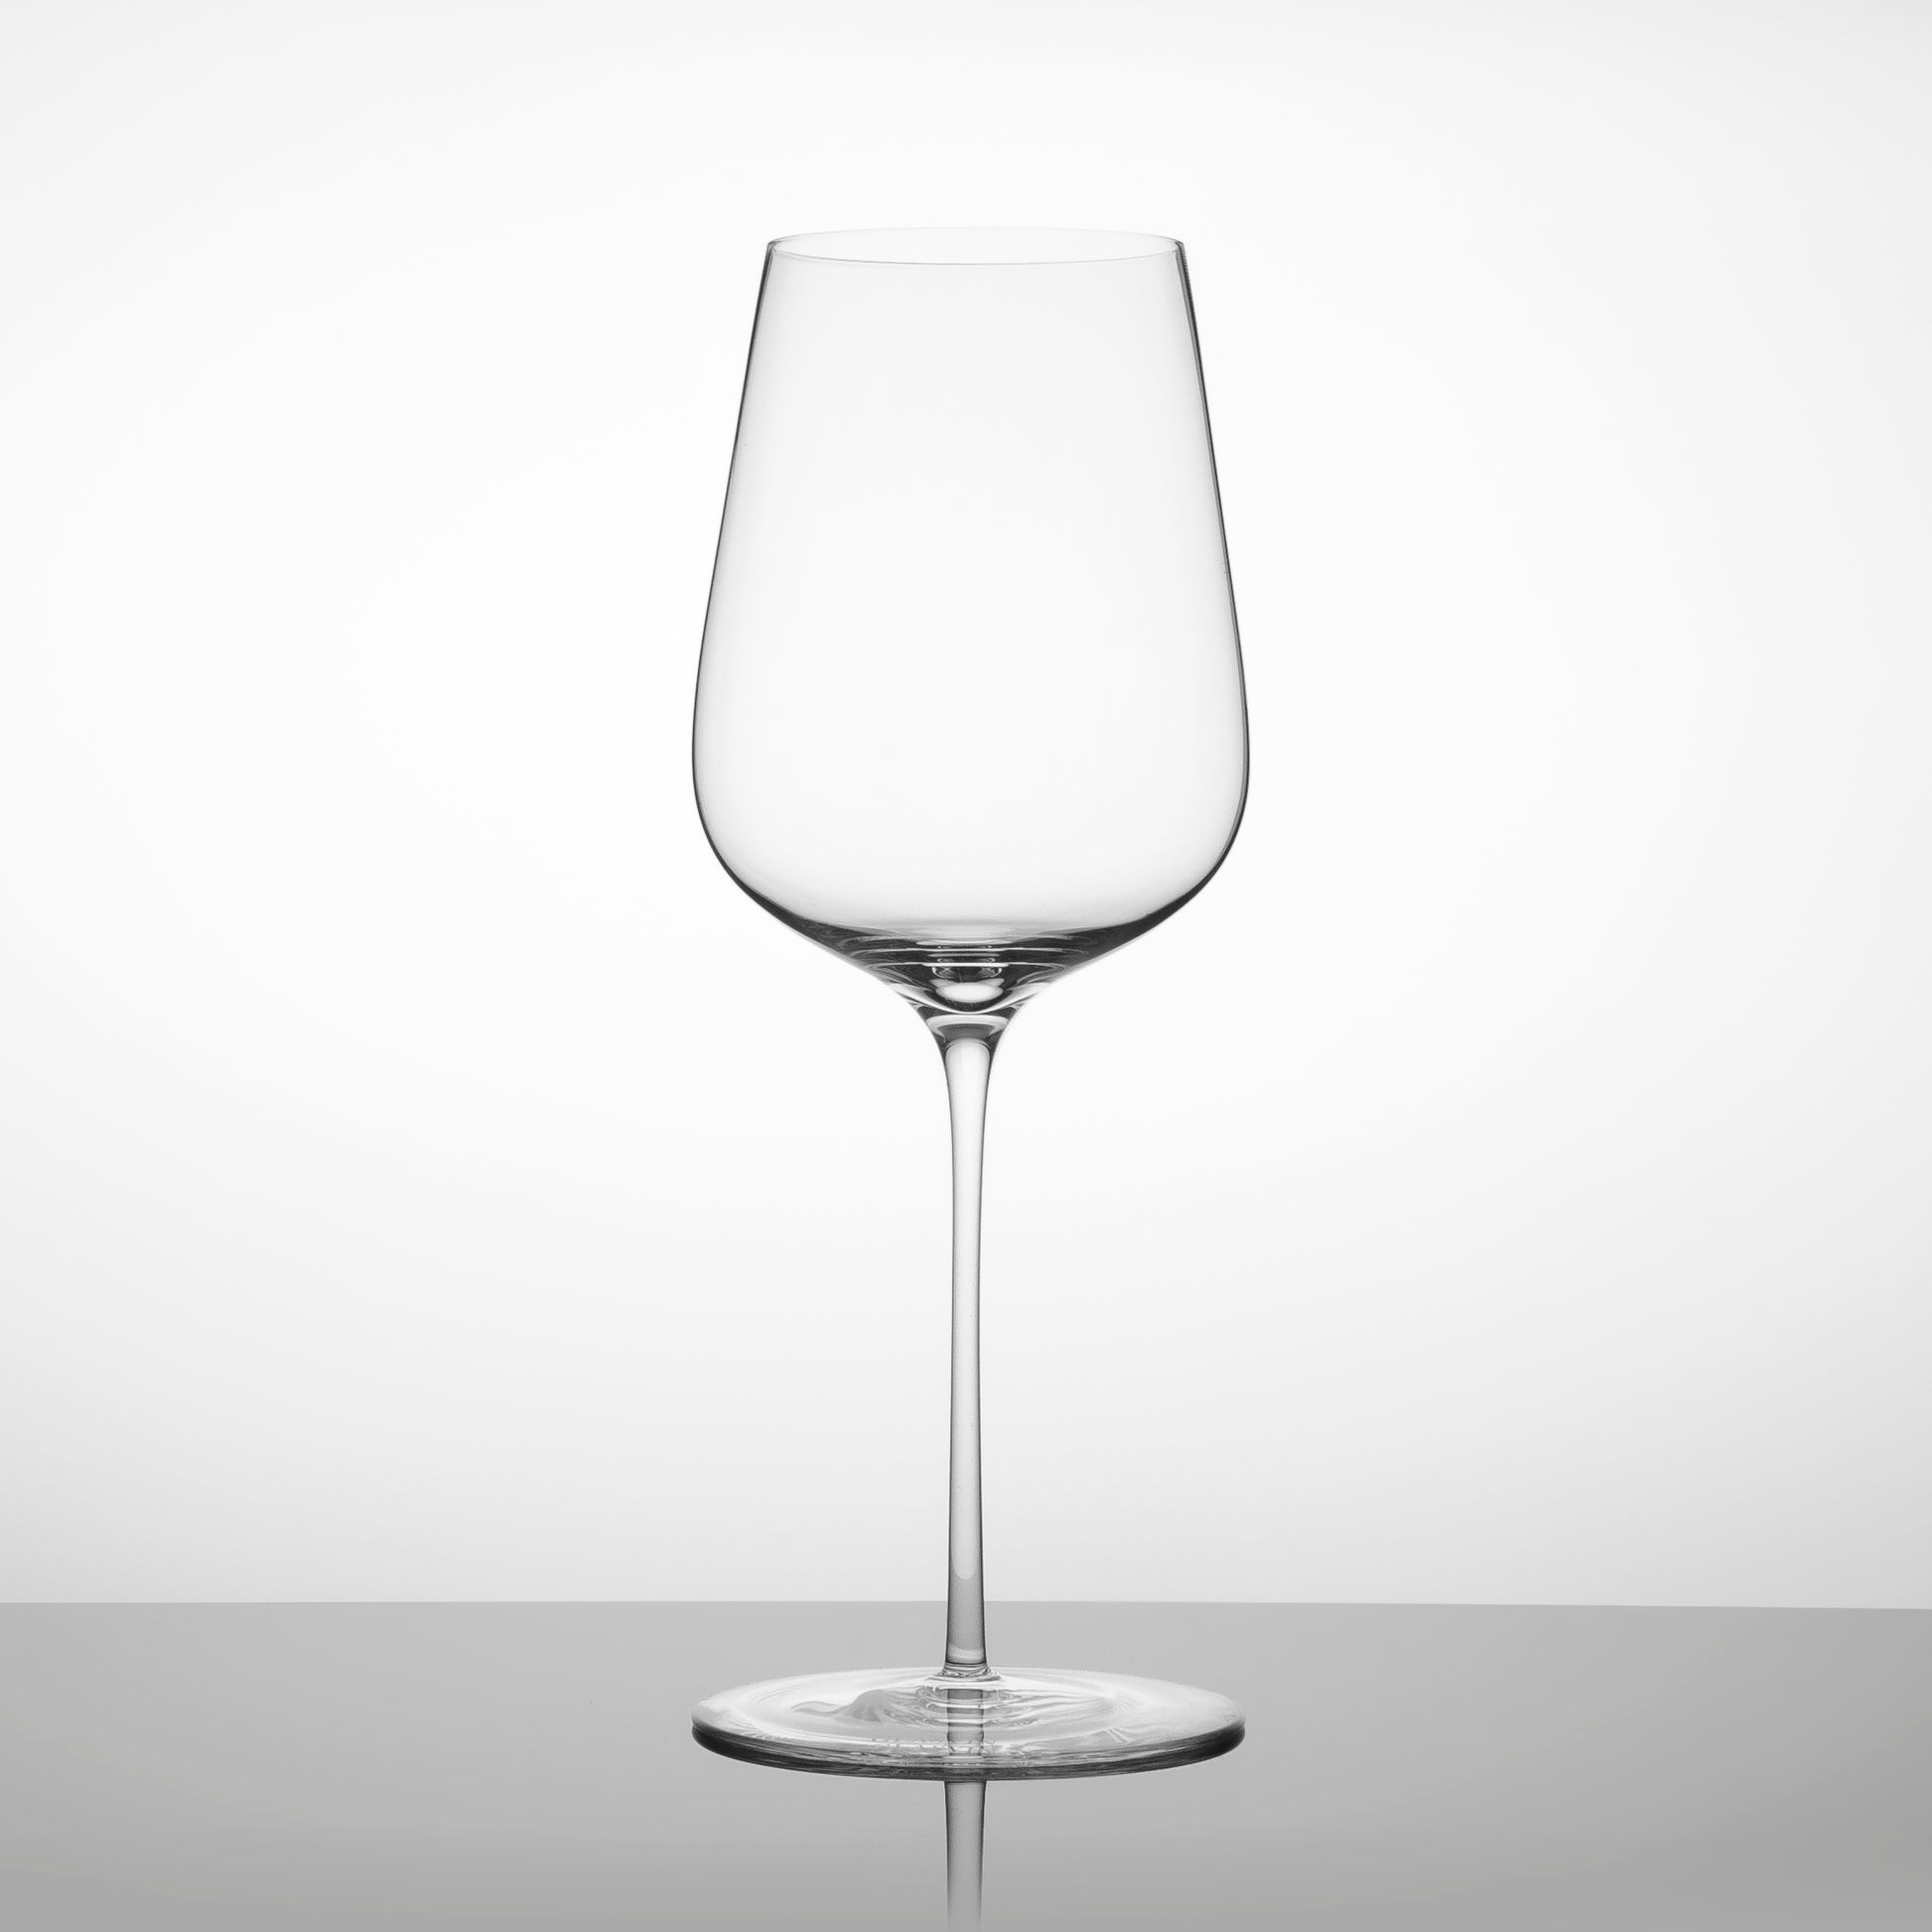 Vinglacé Glass Lined Double Wall Insulated Wine or Cocktail Glass - 10 –  UnMask